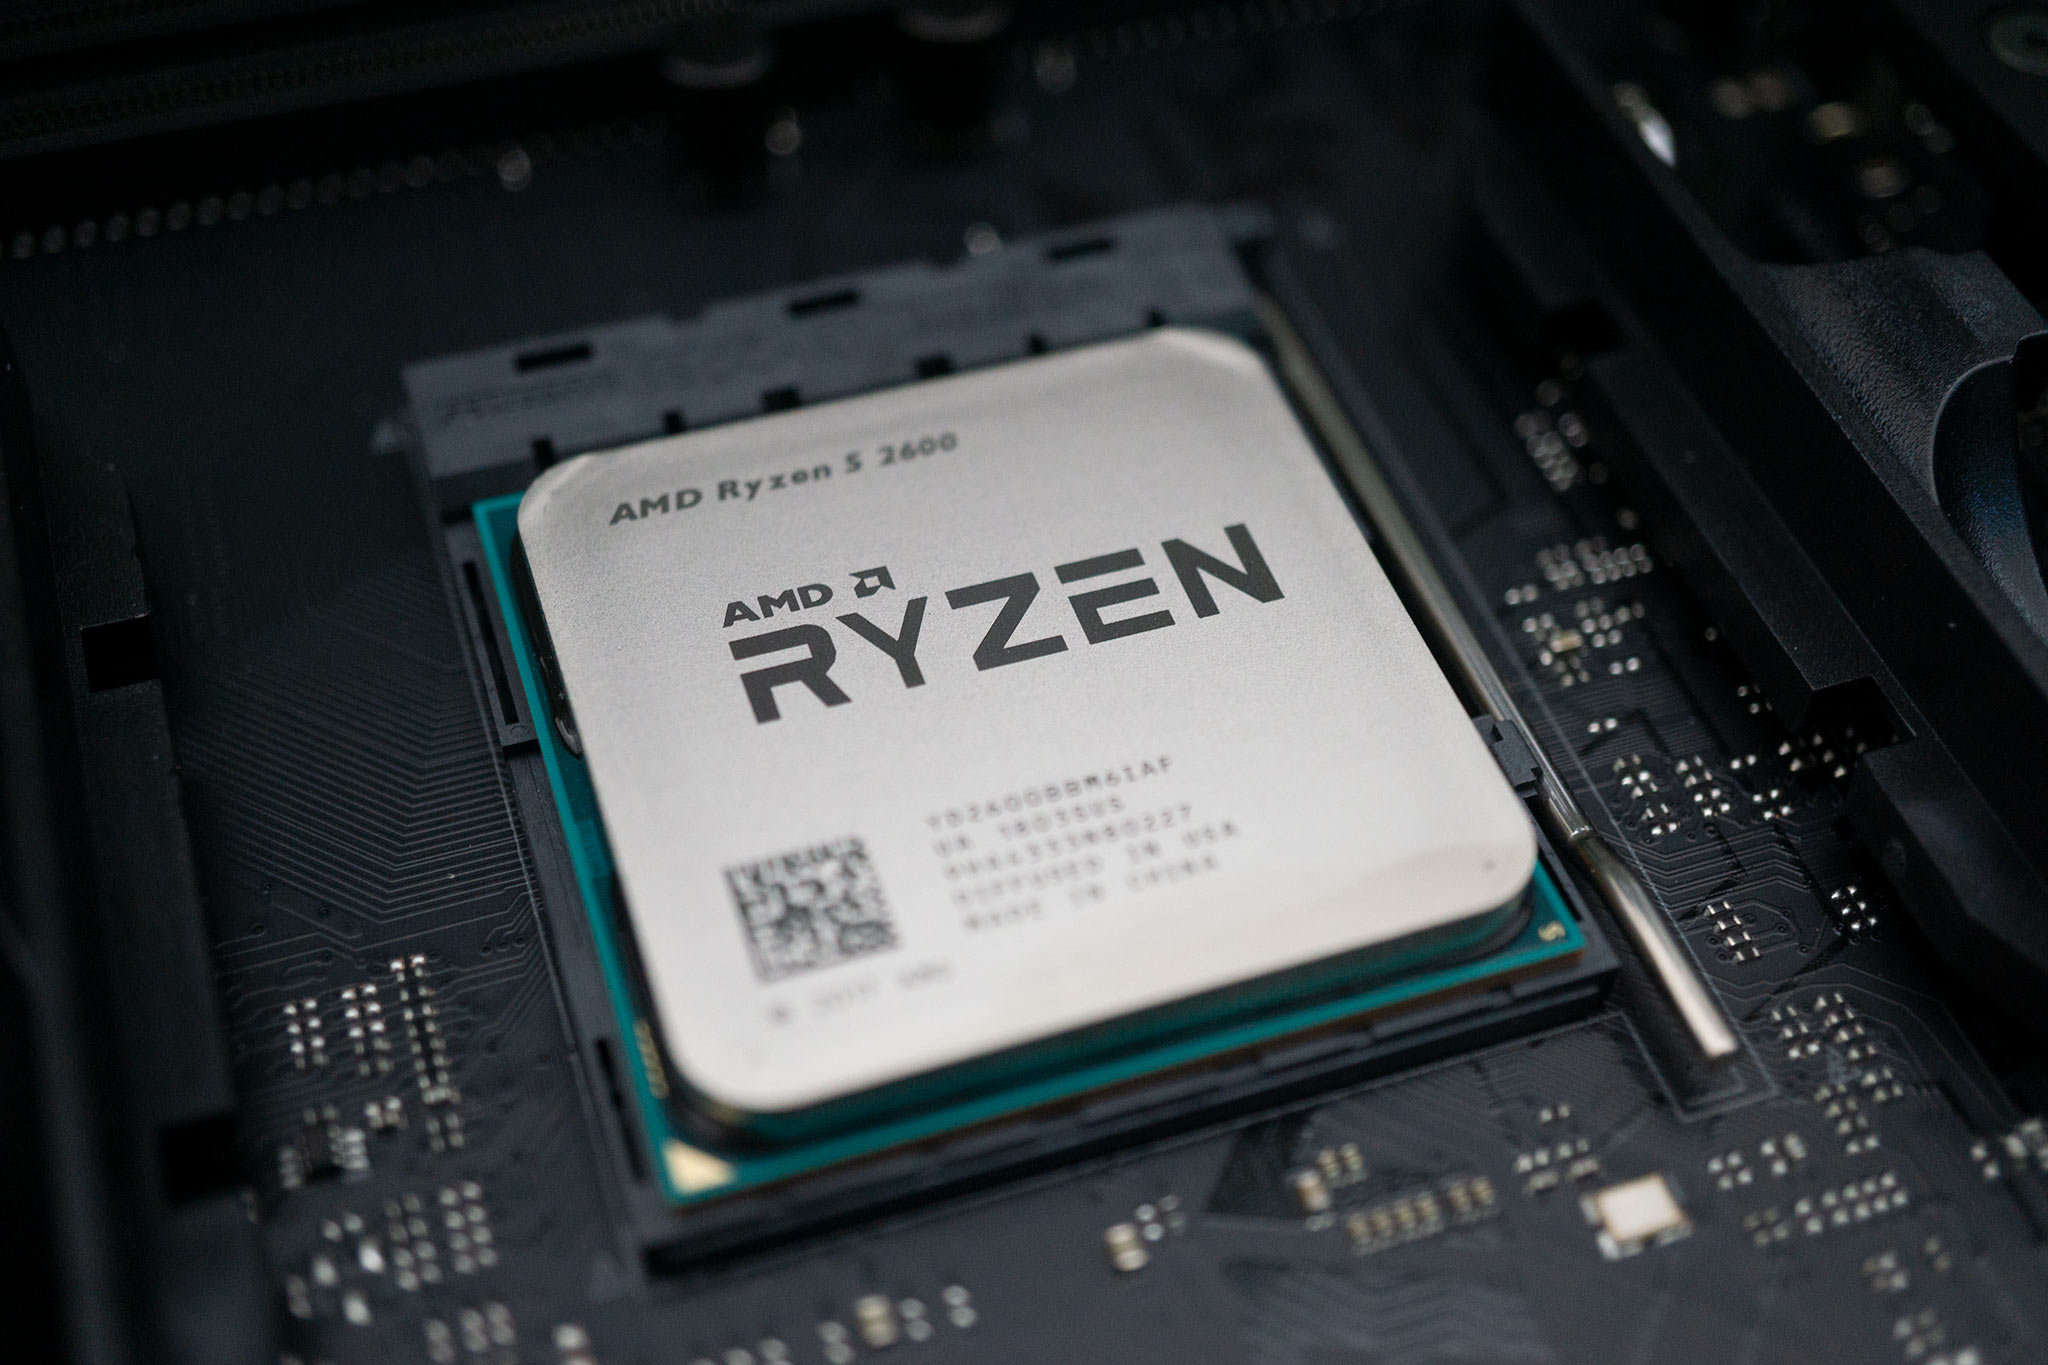 lineal solnedgang gået i stykker How much RAM can you use with AMD Ryzen 5 2600? | Windows Central